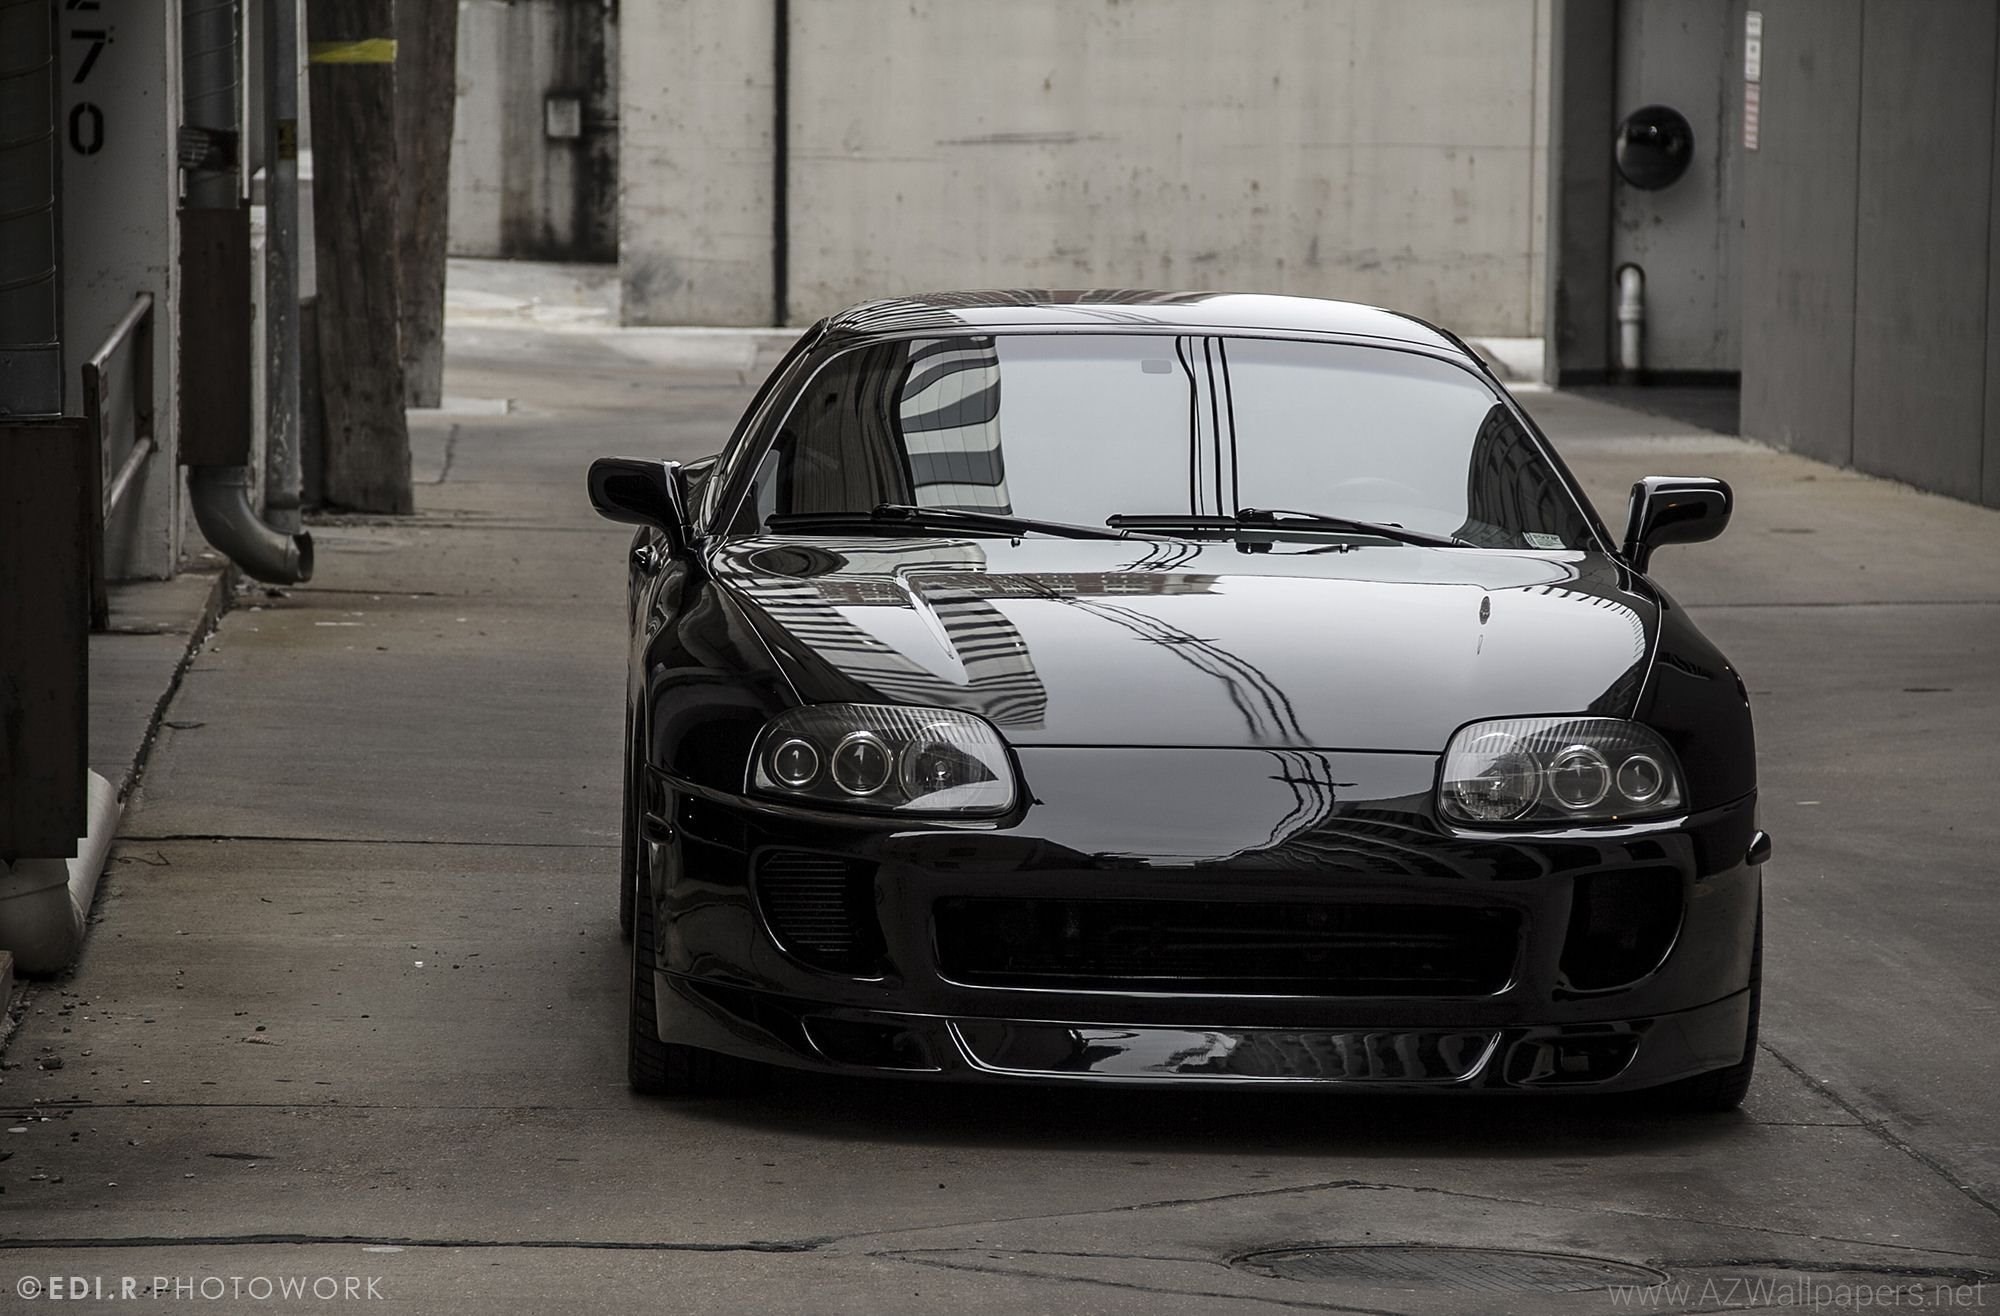 2000x1316 Tuned Toyota Supra Wallpapers